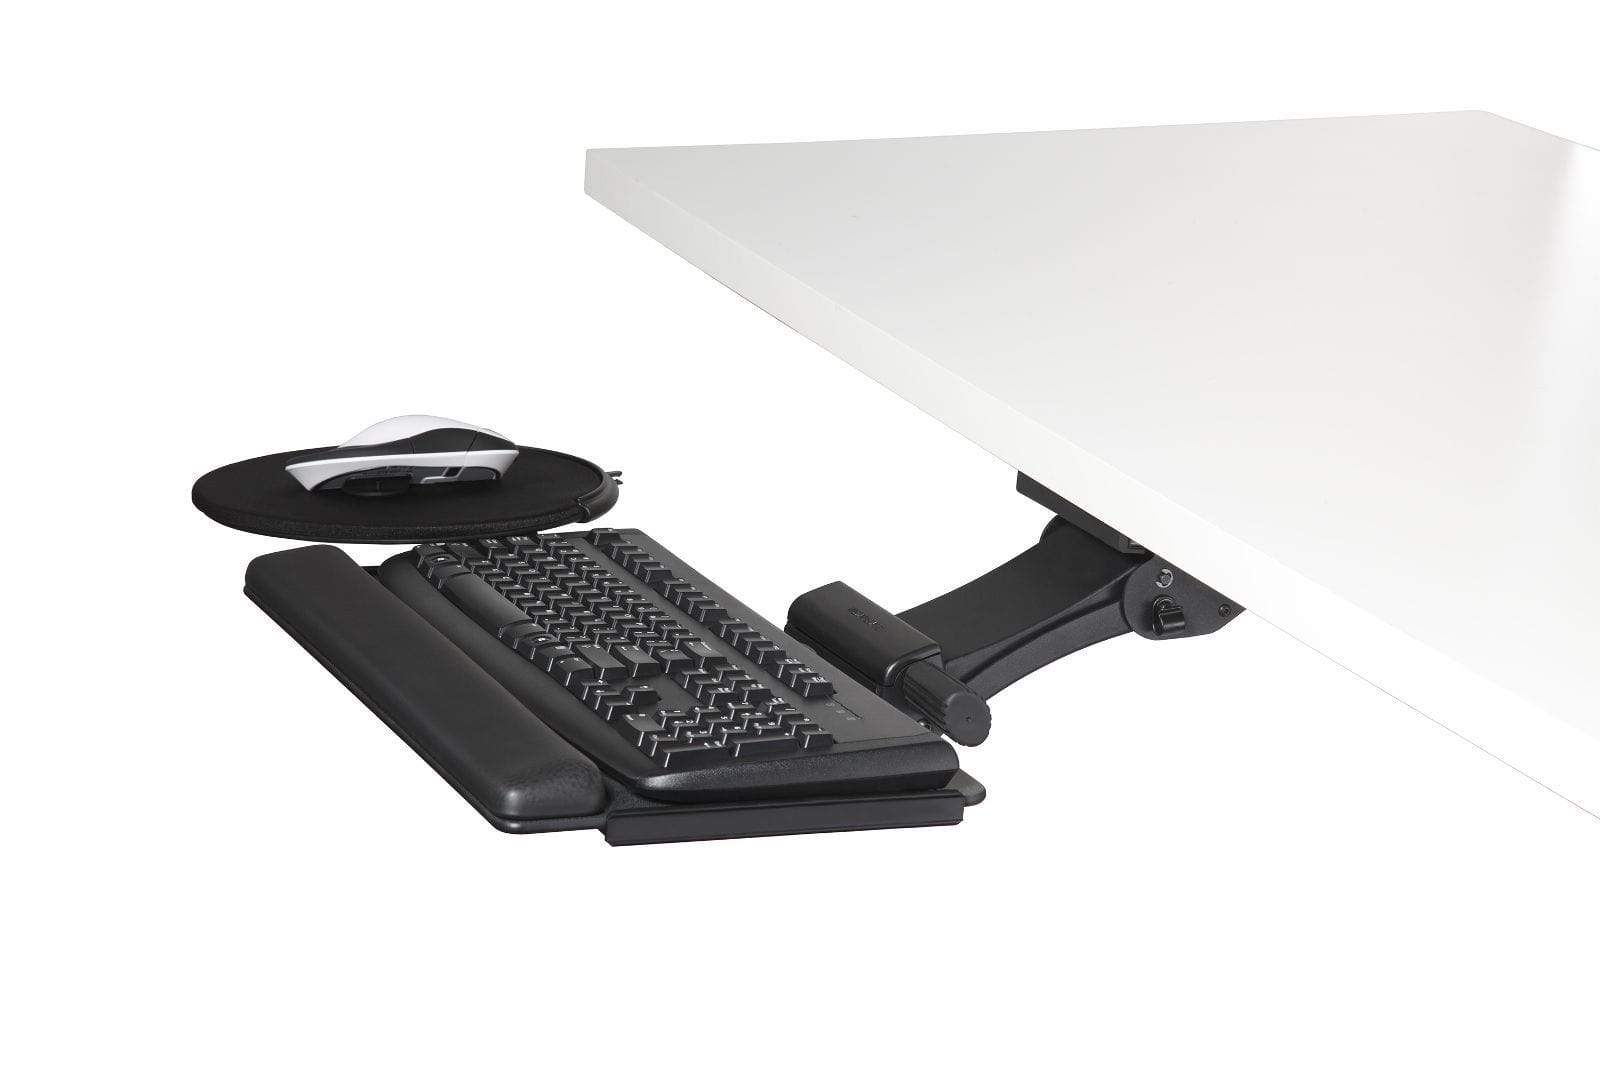 Humanscale Keyboard Tray Select Arm Mechnism / Select Mouse Platform Humanscale 900 Keyboad Tray Build Your Own Single or Dual Mouse